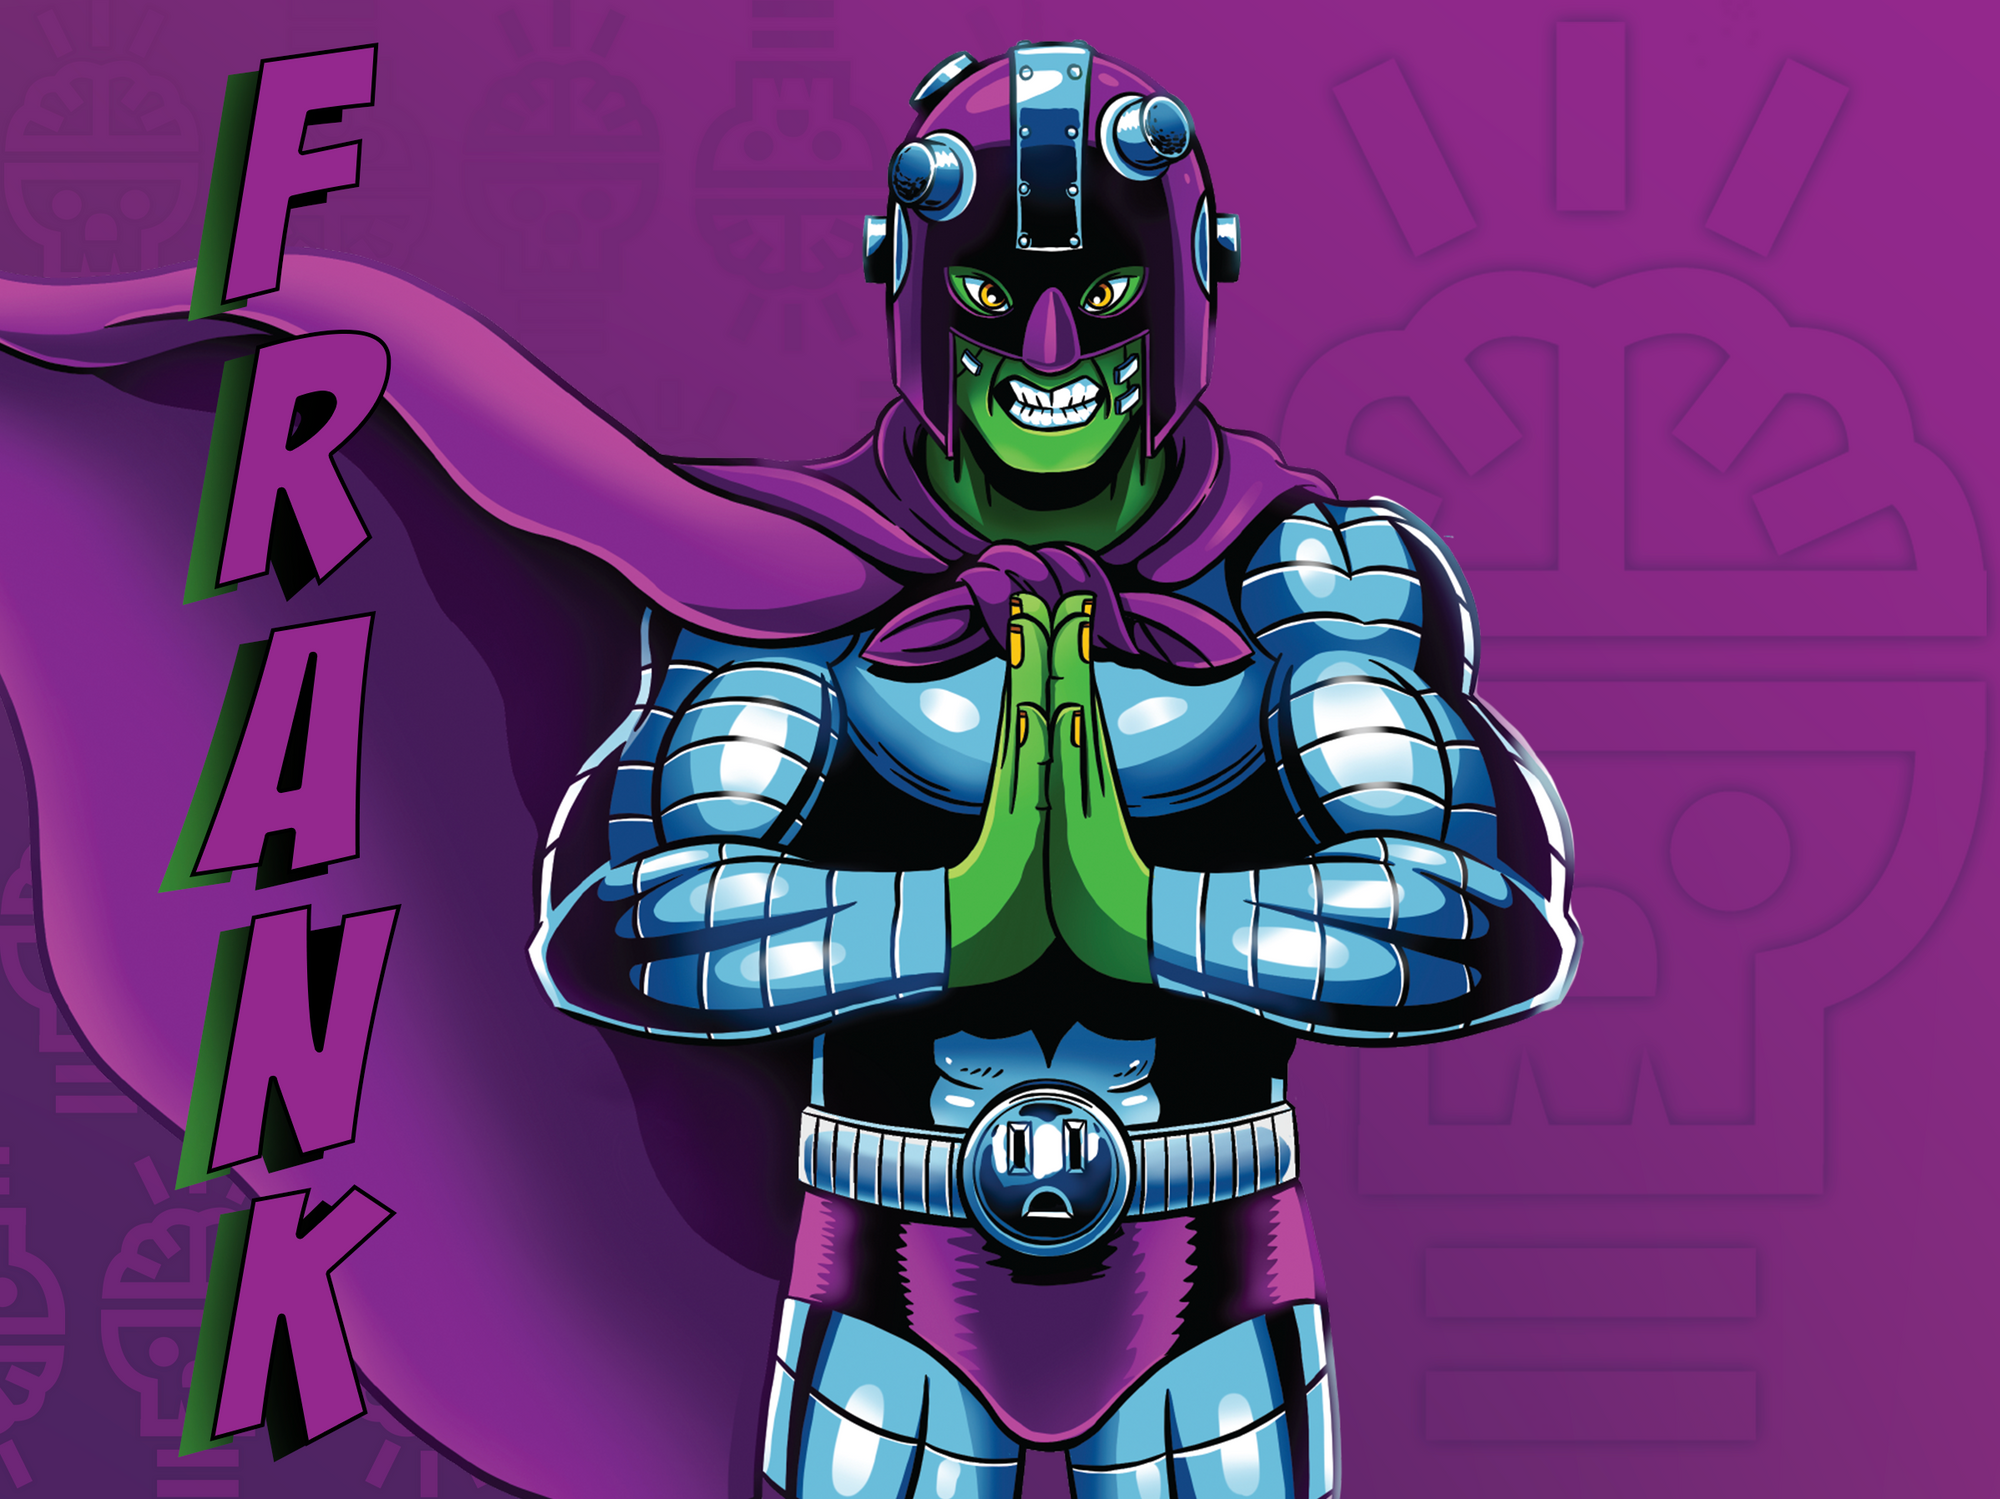 "Comic style monster character, wearing studded hot purple helmet and metallic silver tone accents with lightbulb skull brain icon in background, with name title Frankenstein "